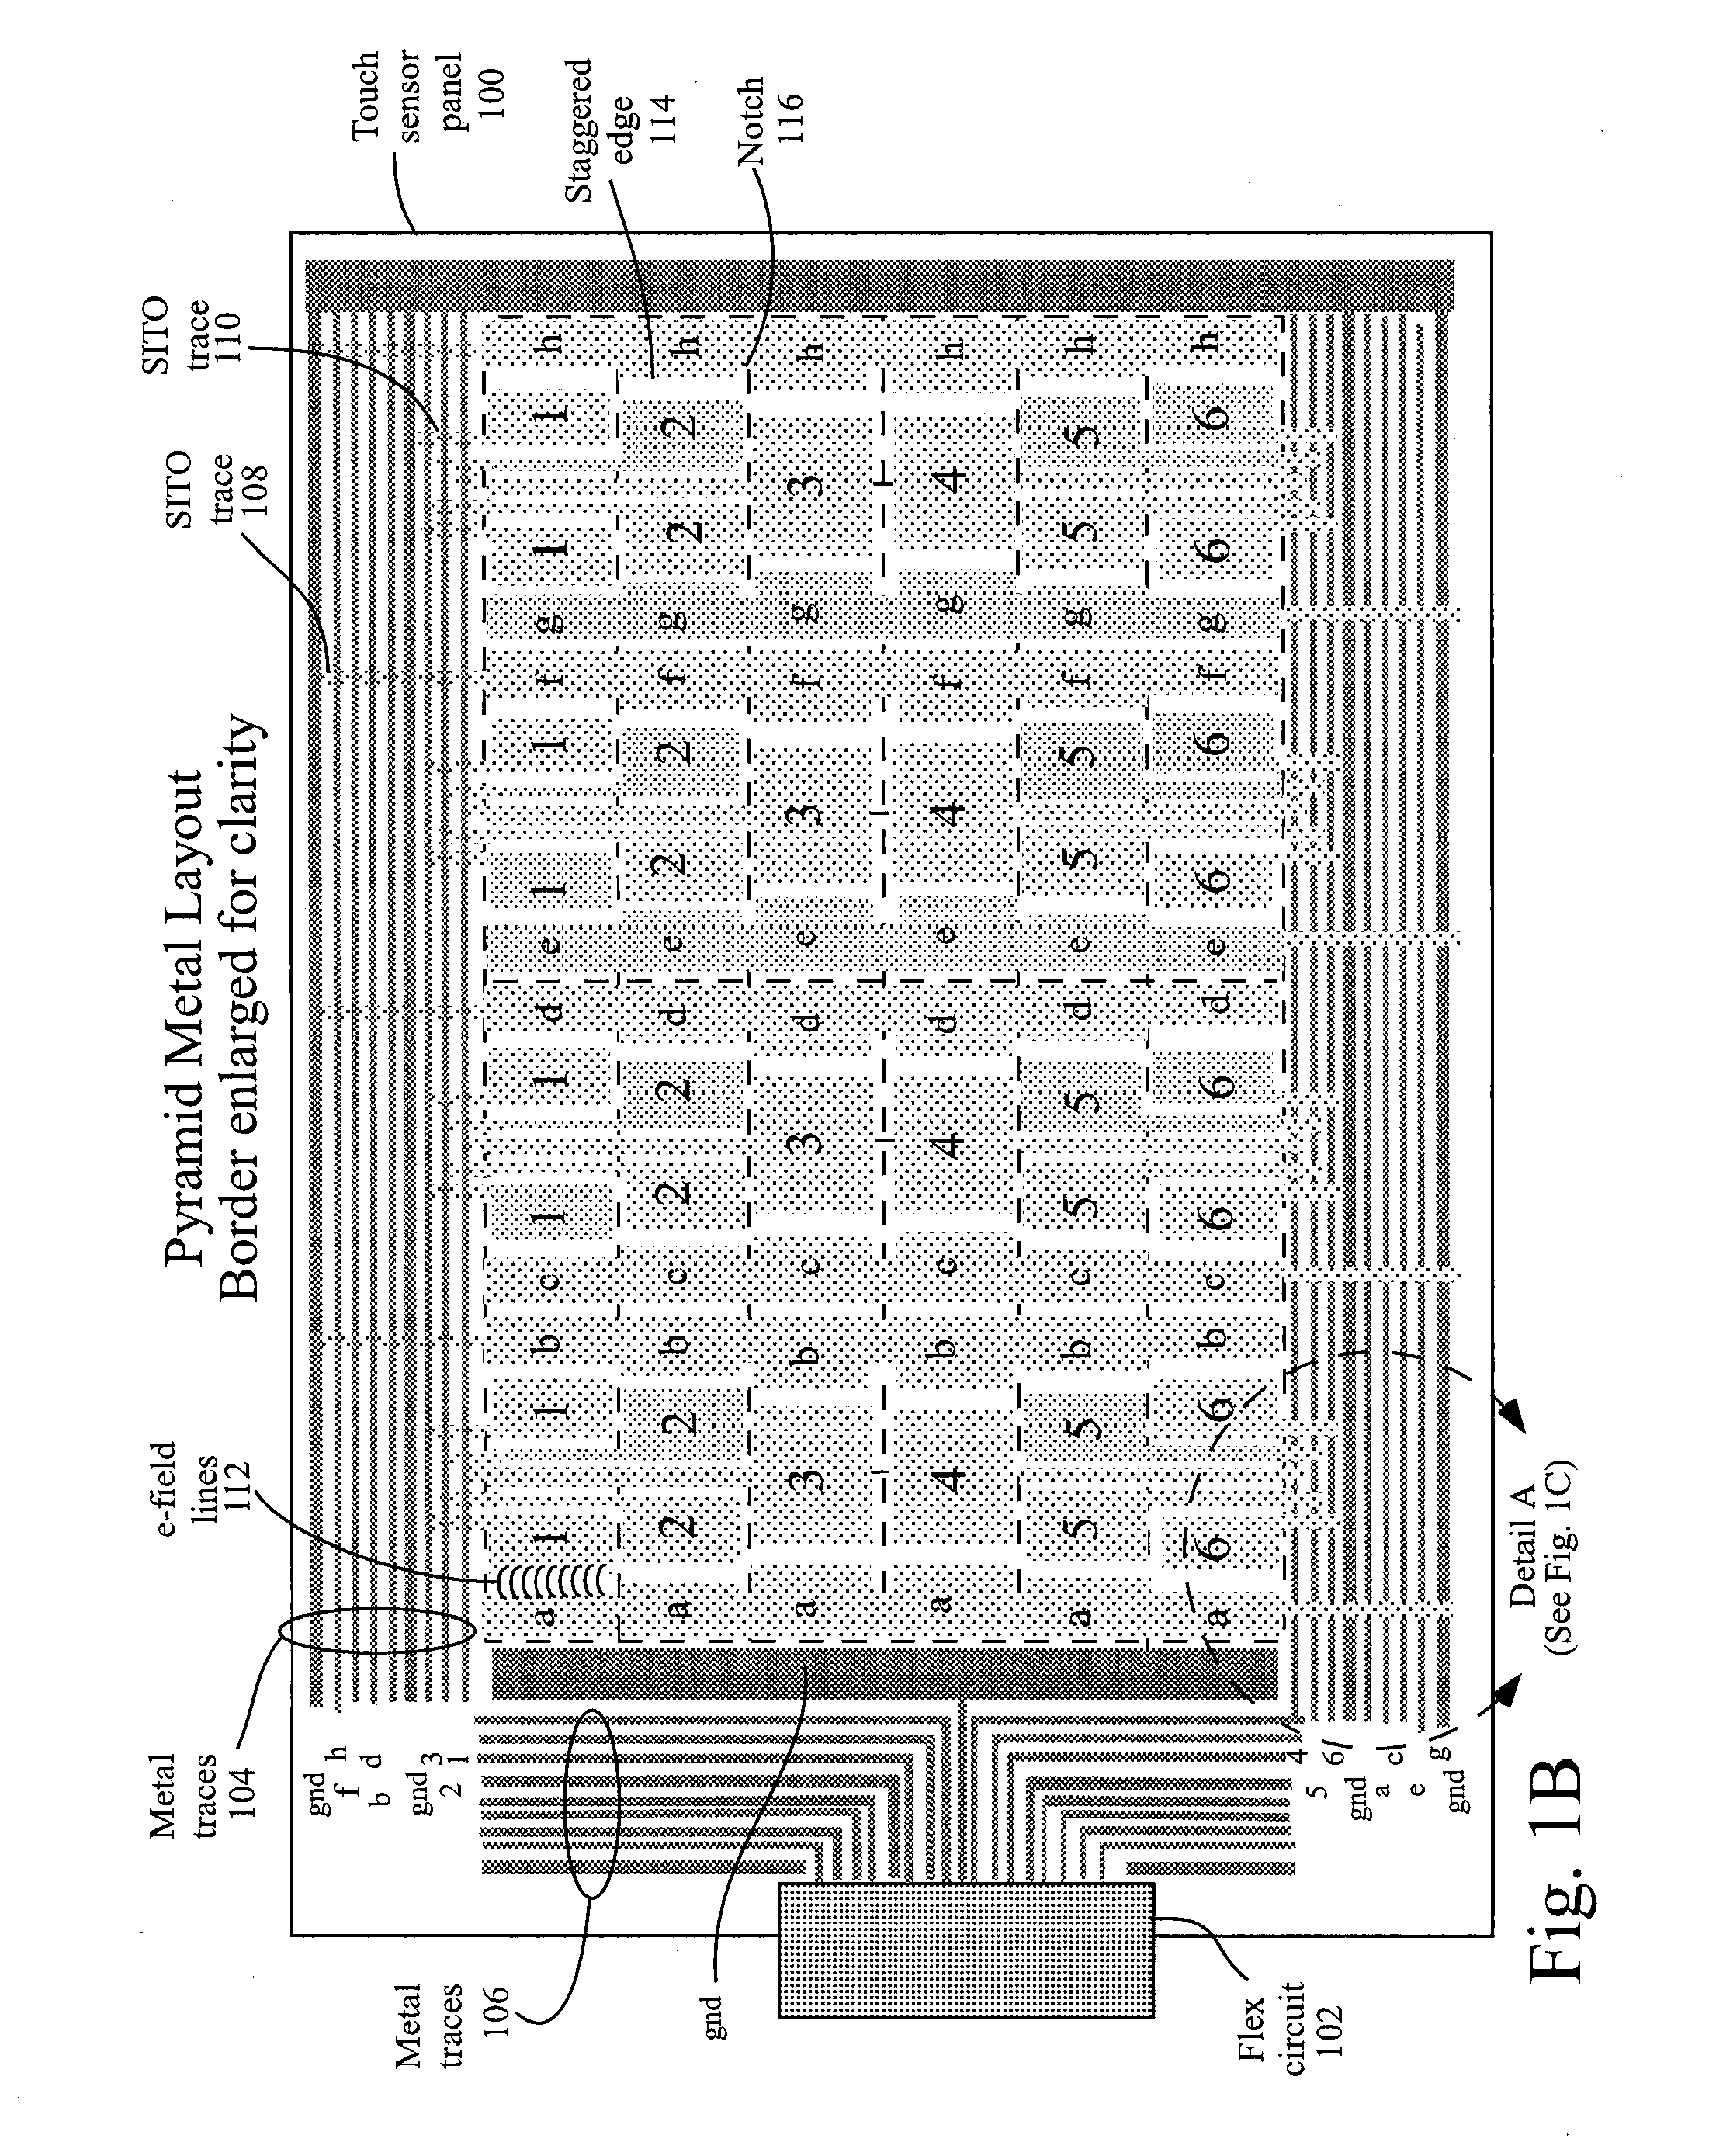 Single-layer touch-sensitive display